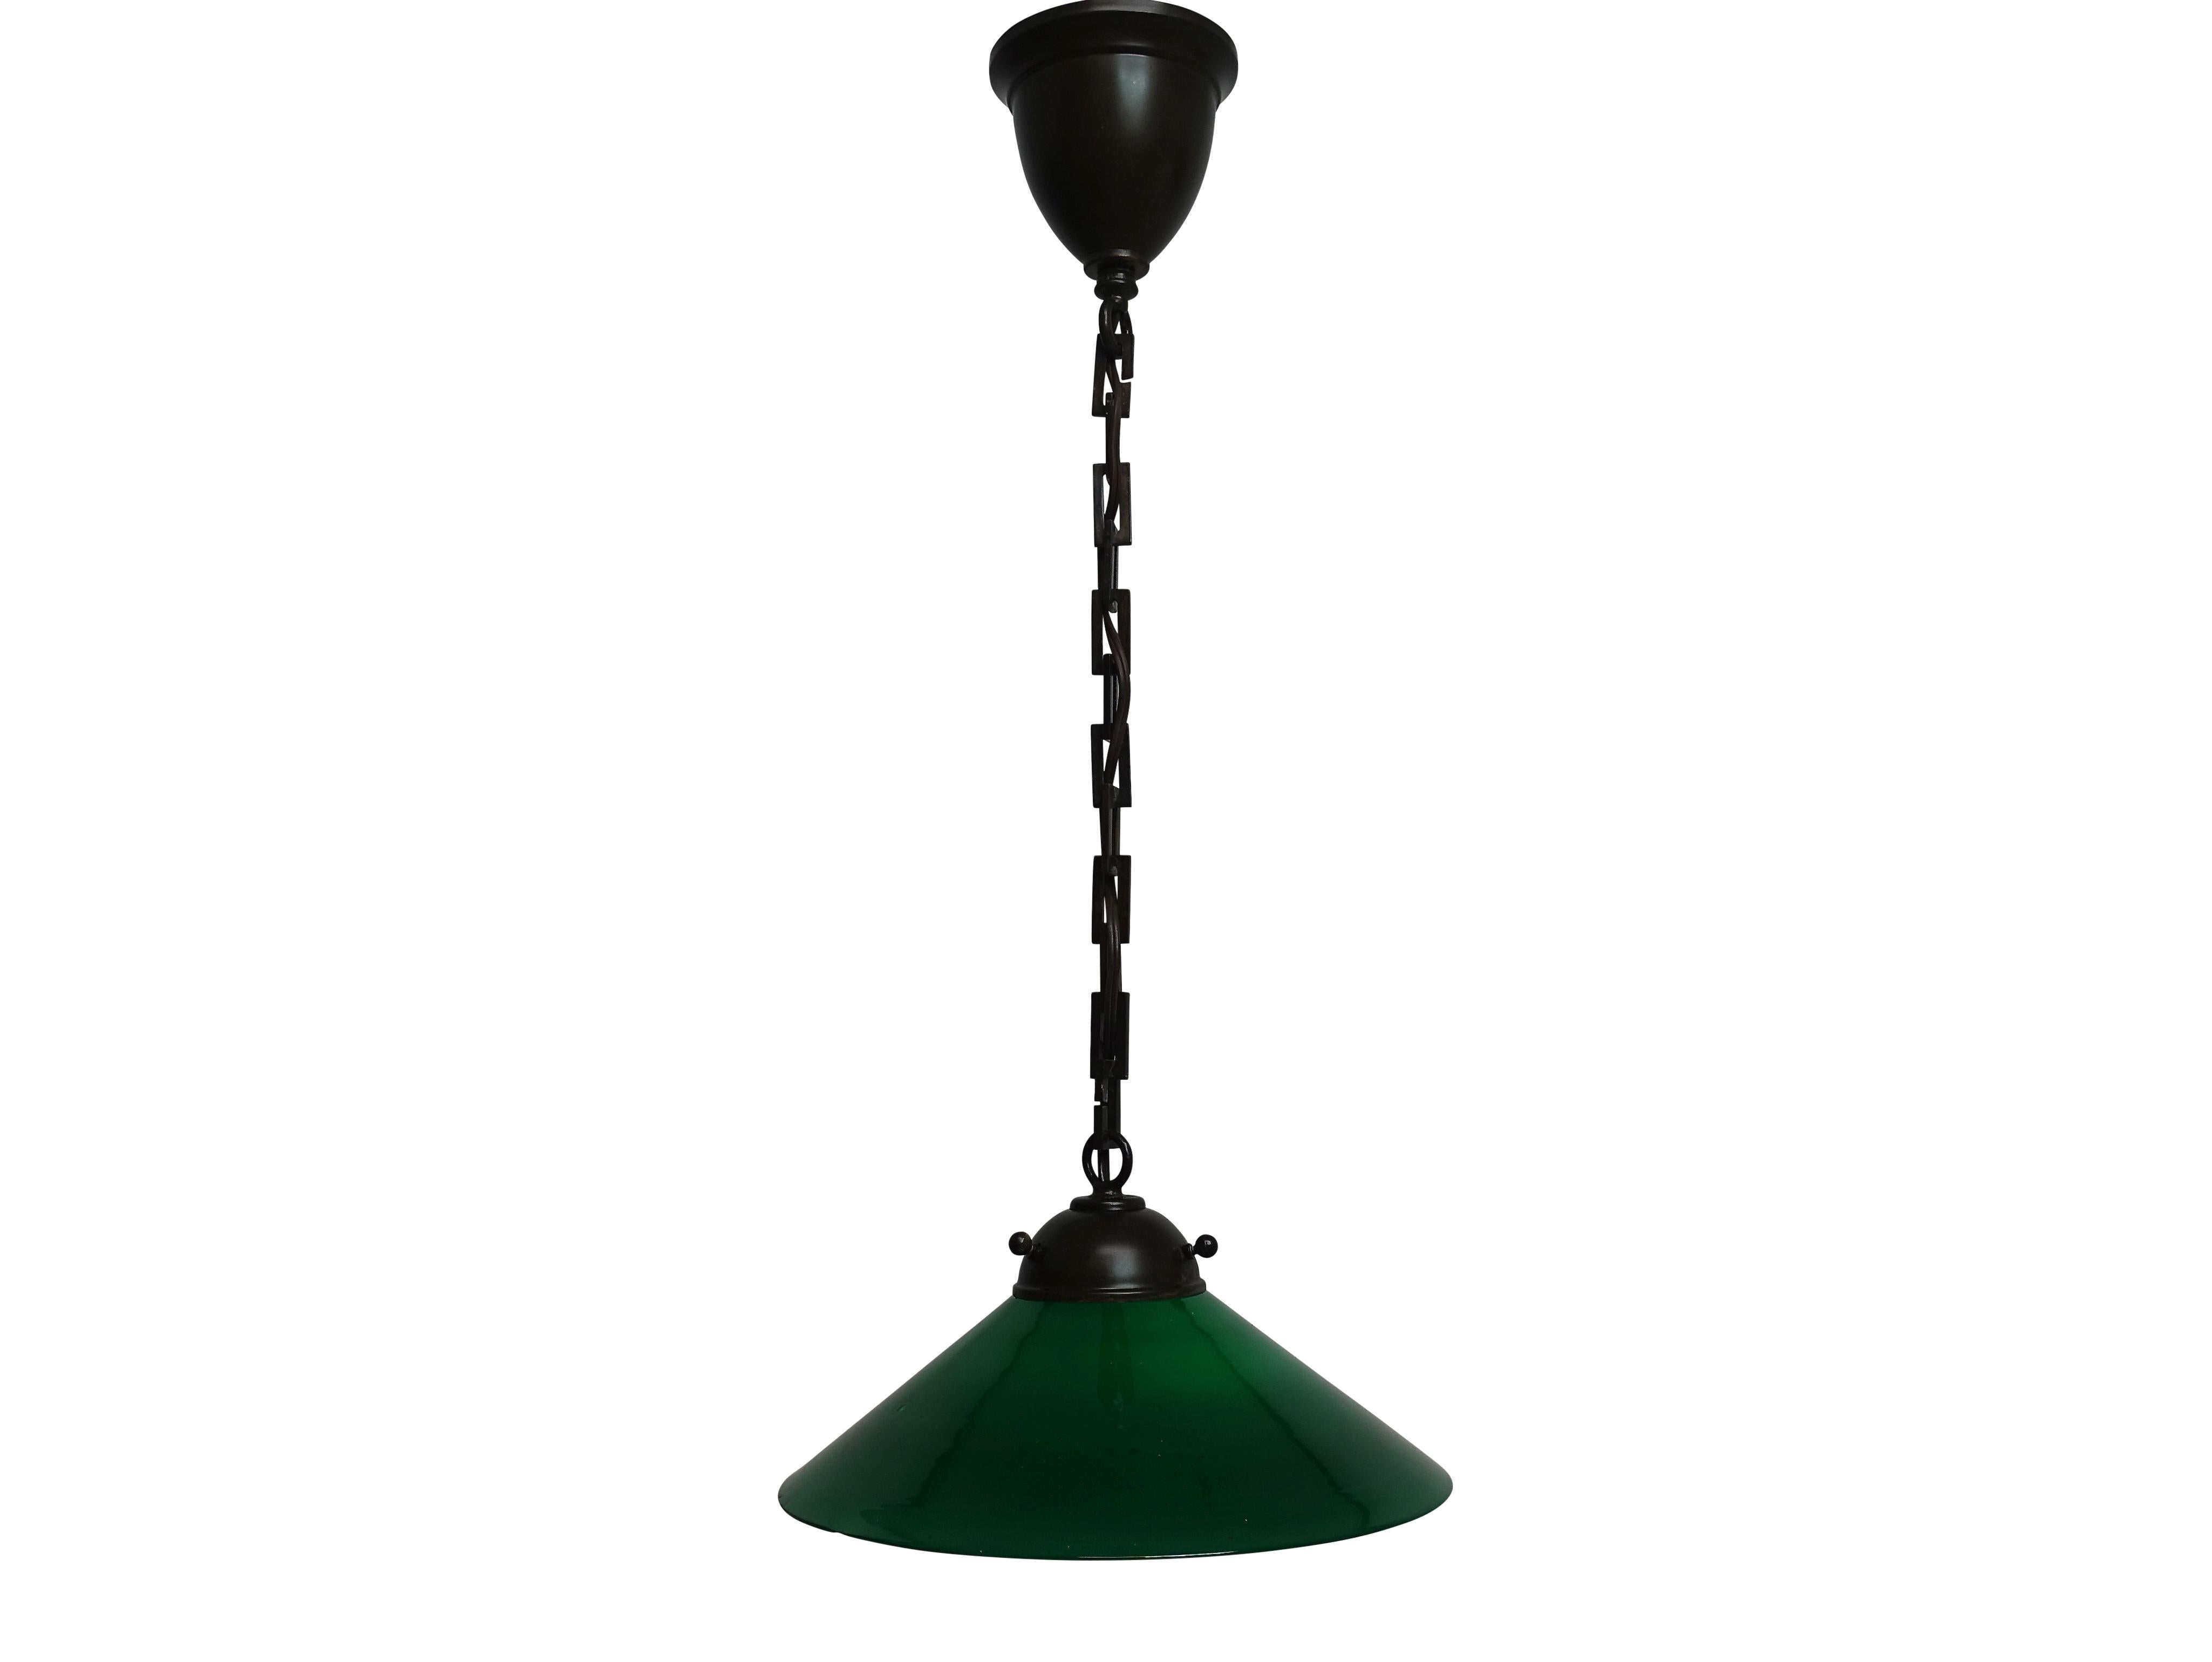 An antique small emerald green encased glass light shade made into a hanging pendant light fixture. Newly wired, holds a single standard size light bulb. Chain can be shortened or lengthened to desired height.